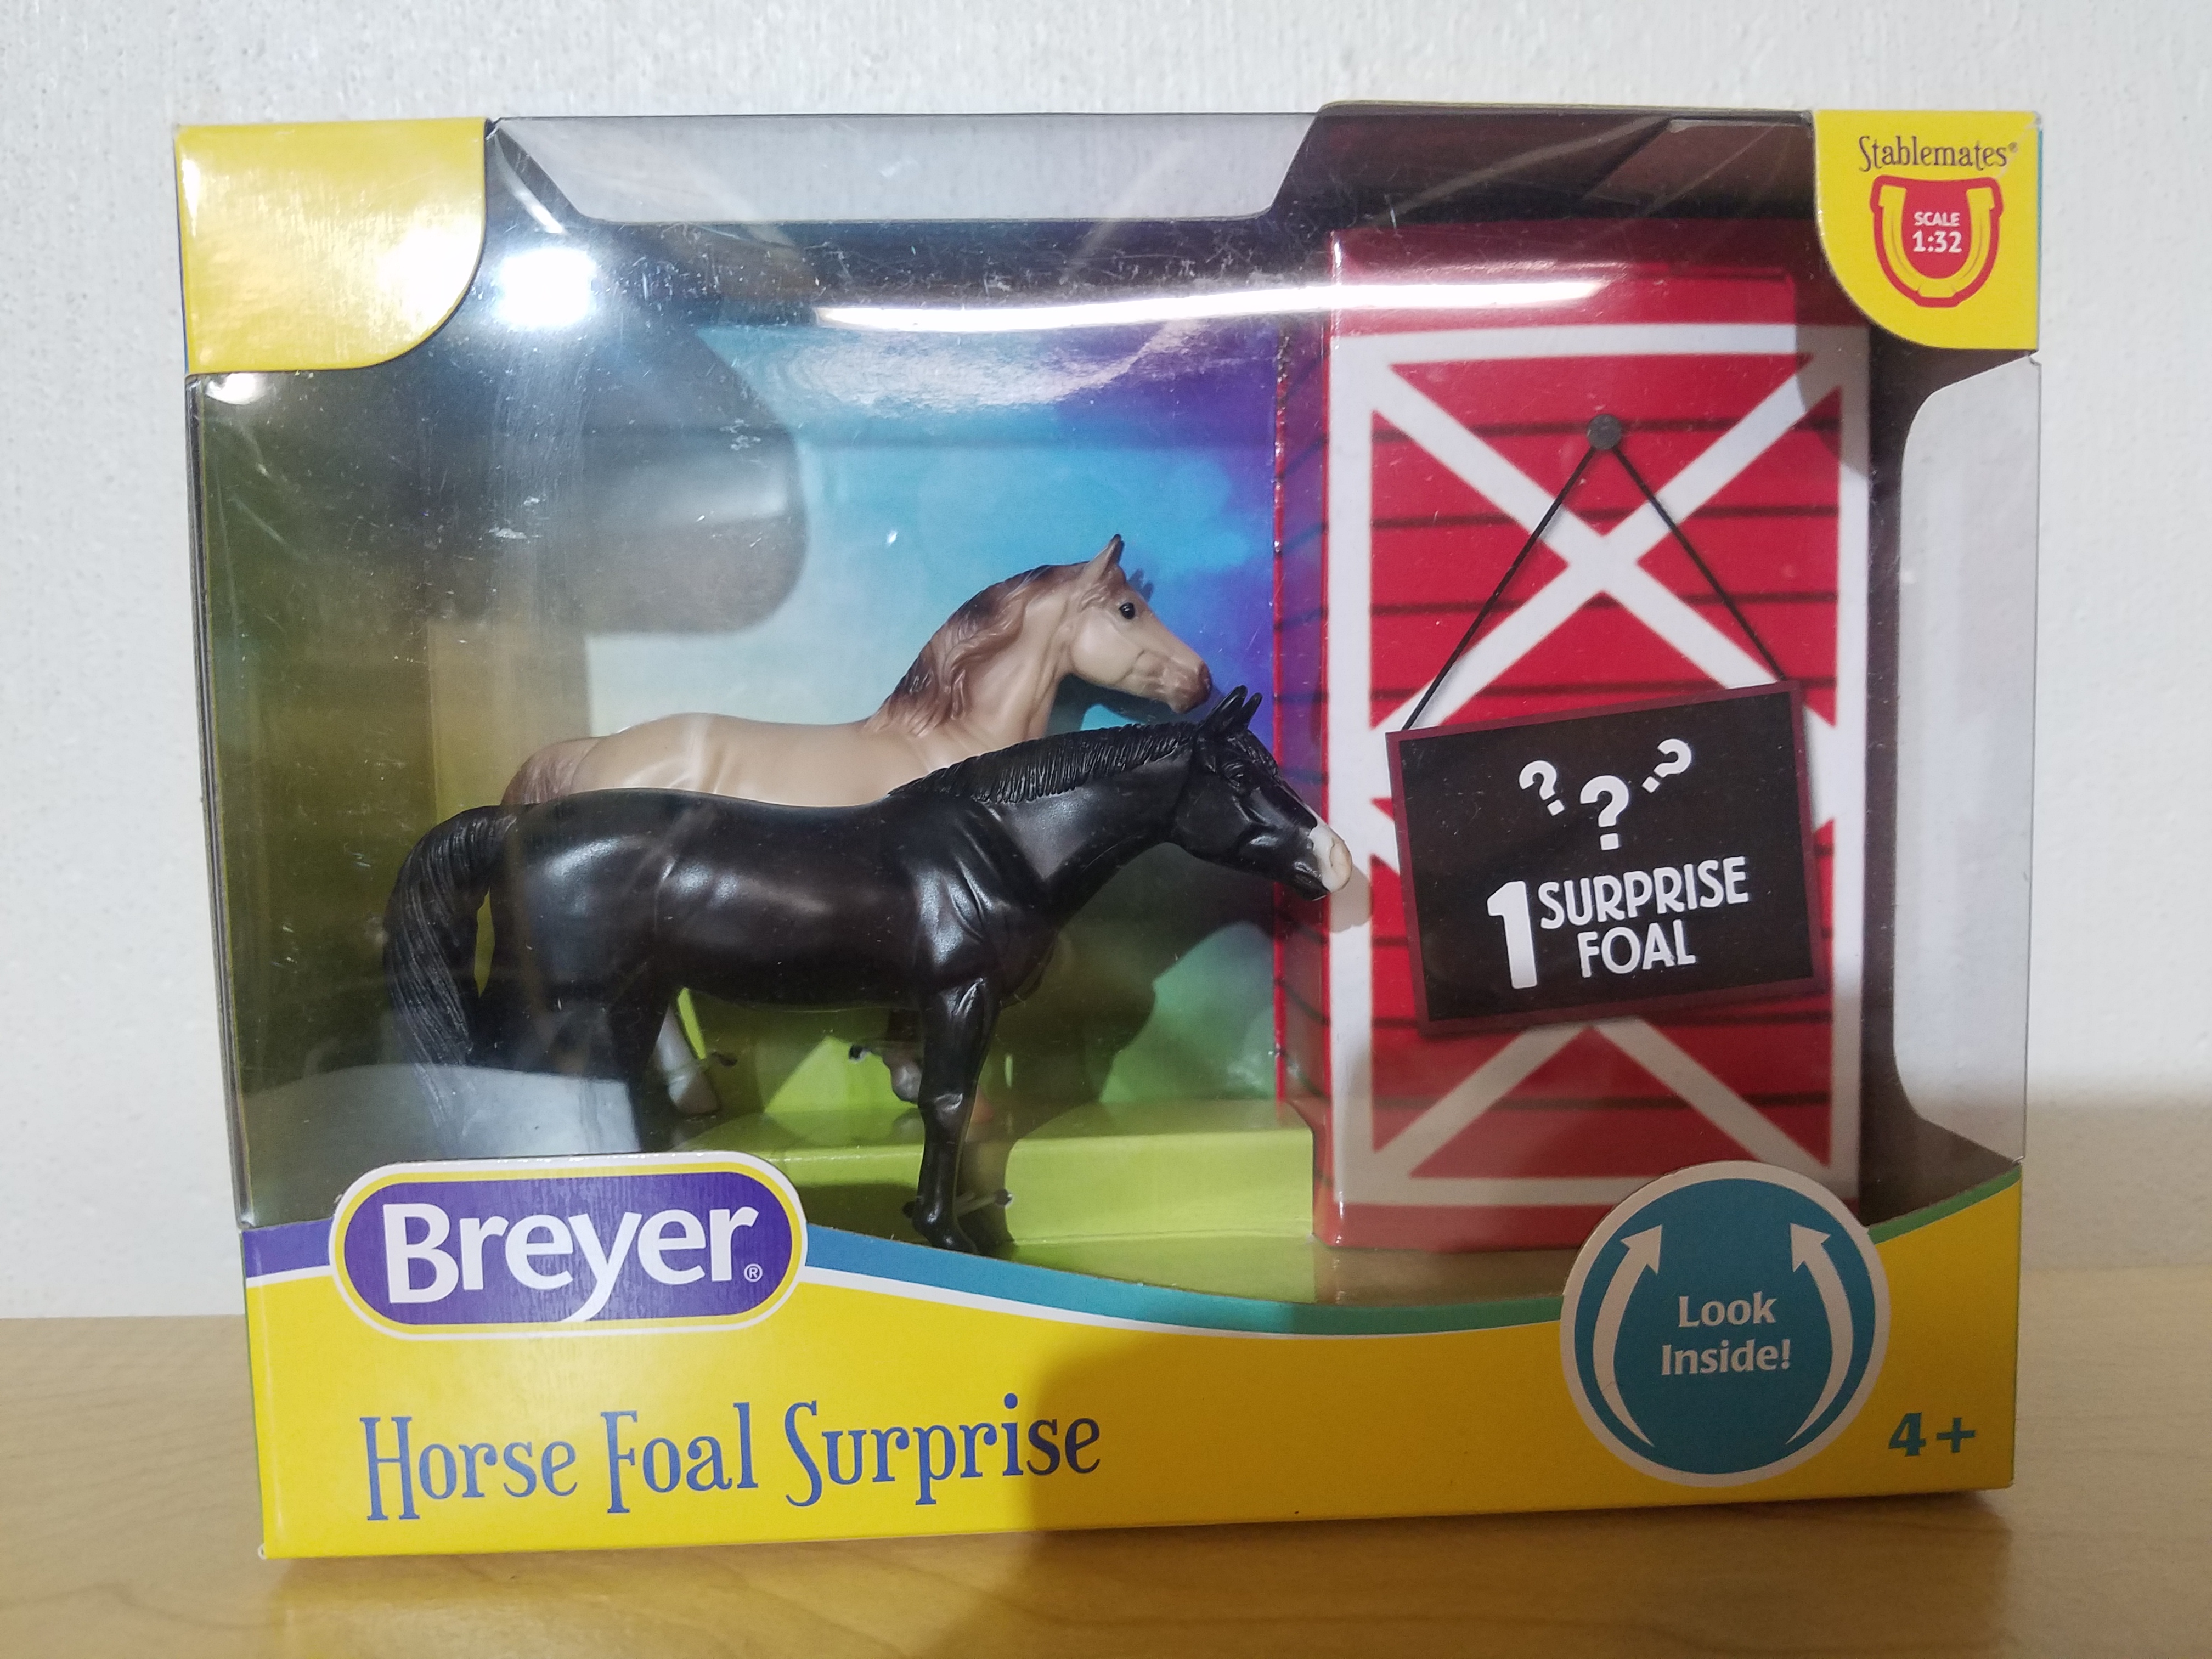 Breyer Stablemates Horse Foal Surprise #6222